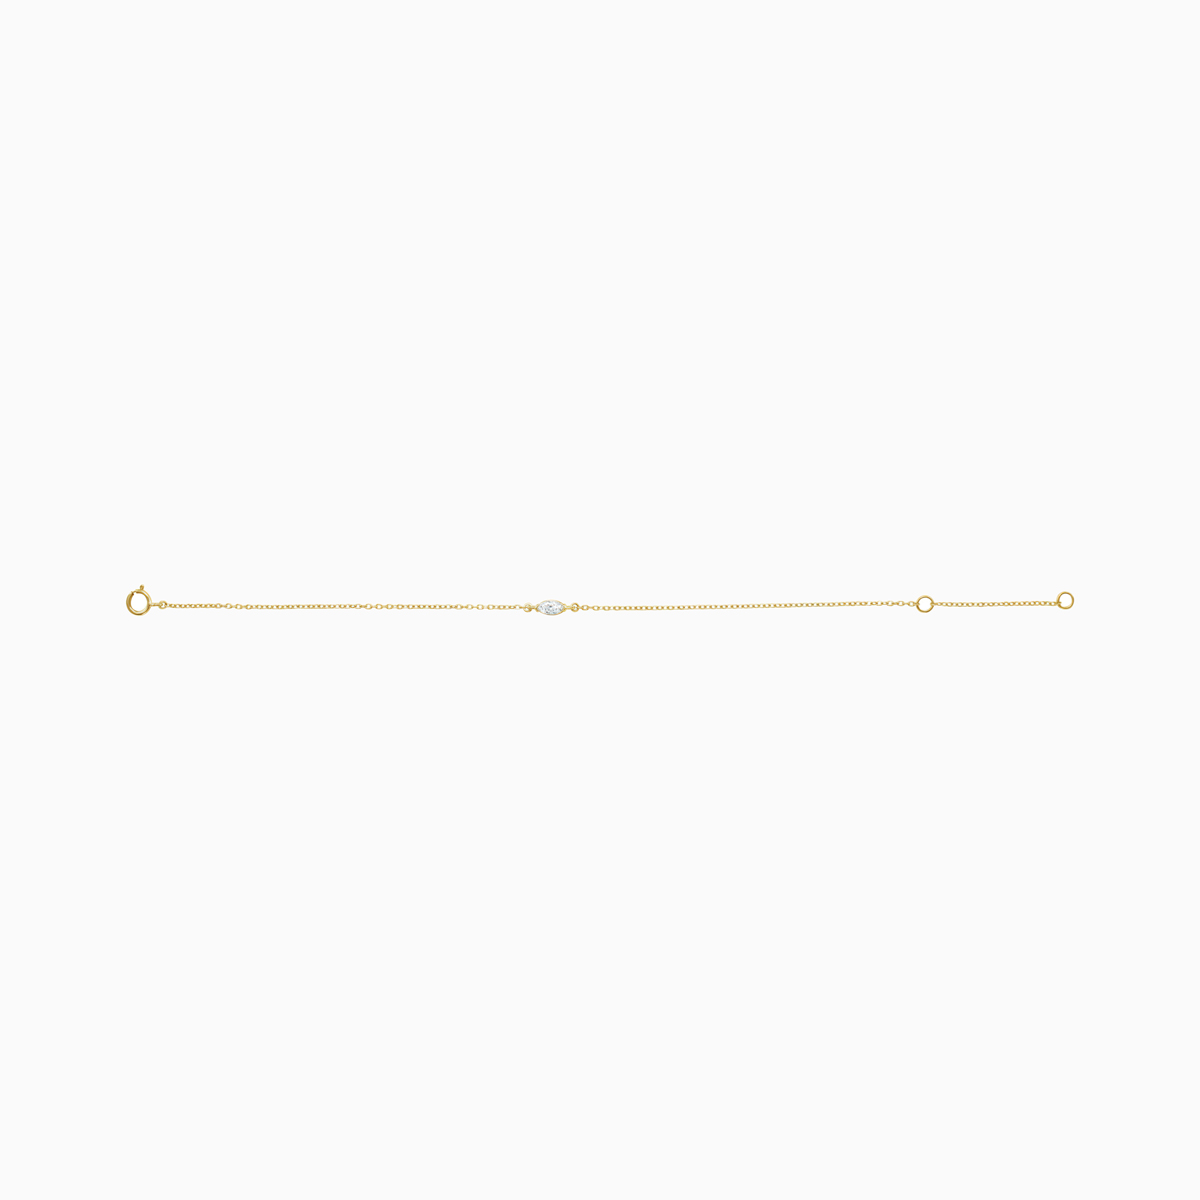 Lab-grown Marquise Diamond Accented Link Bracelet, 14k Gold